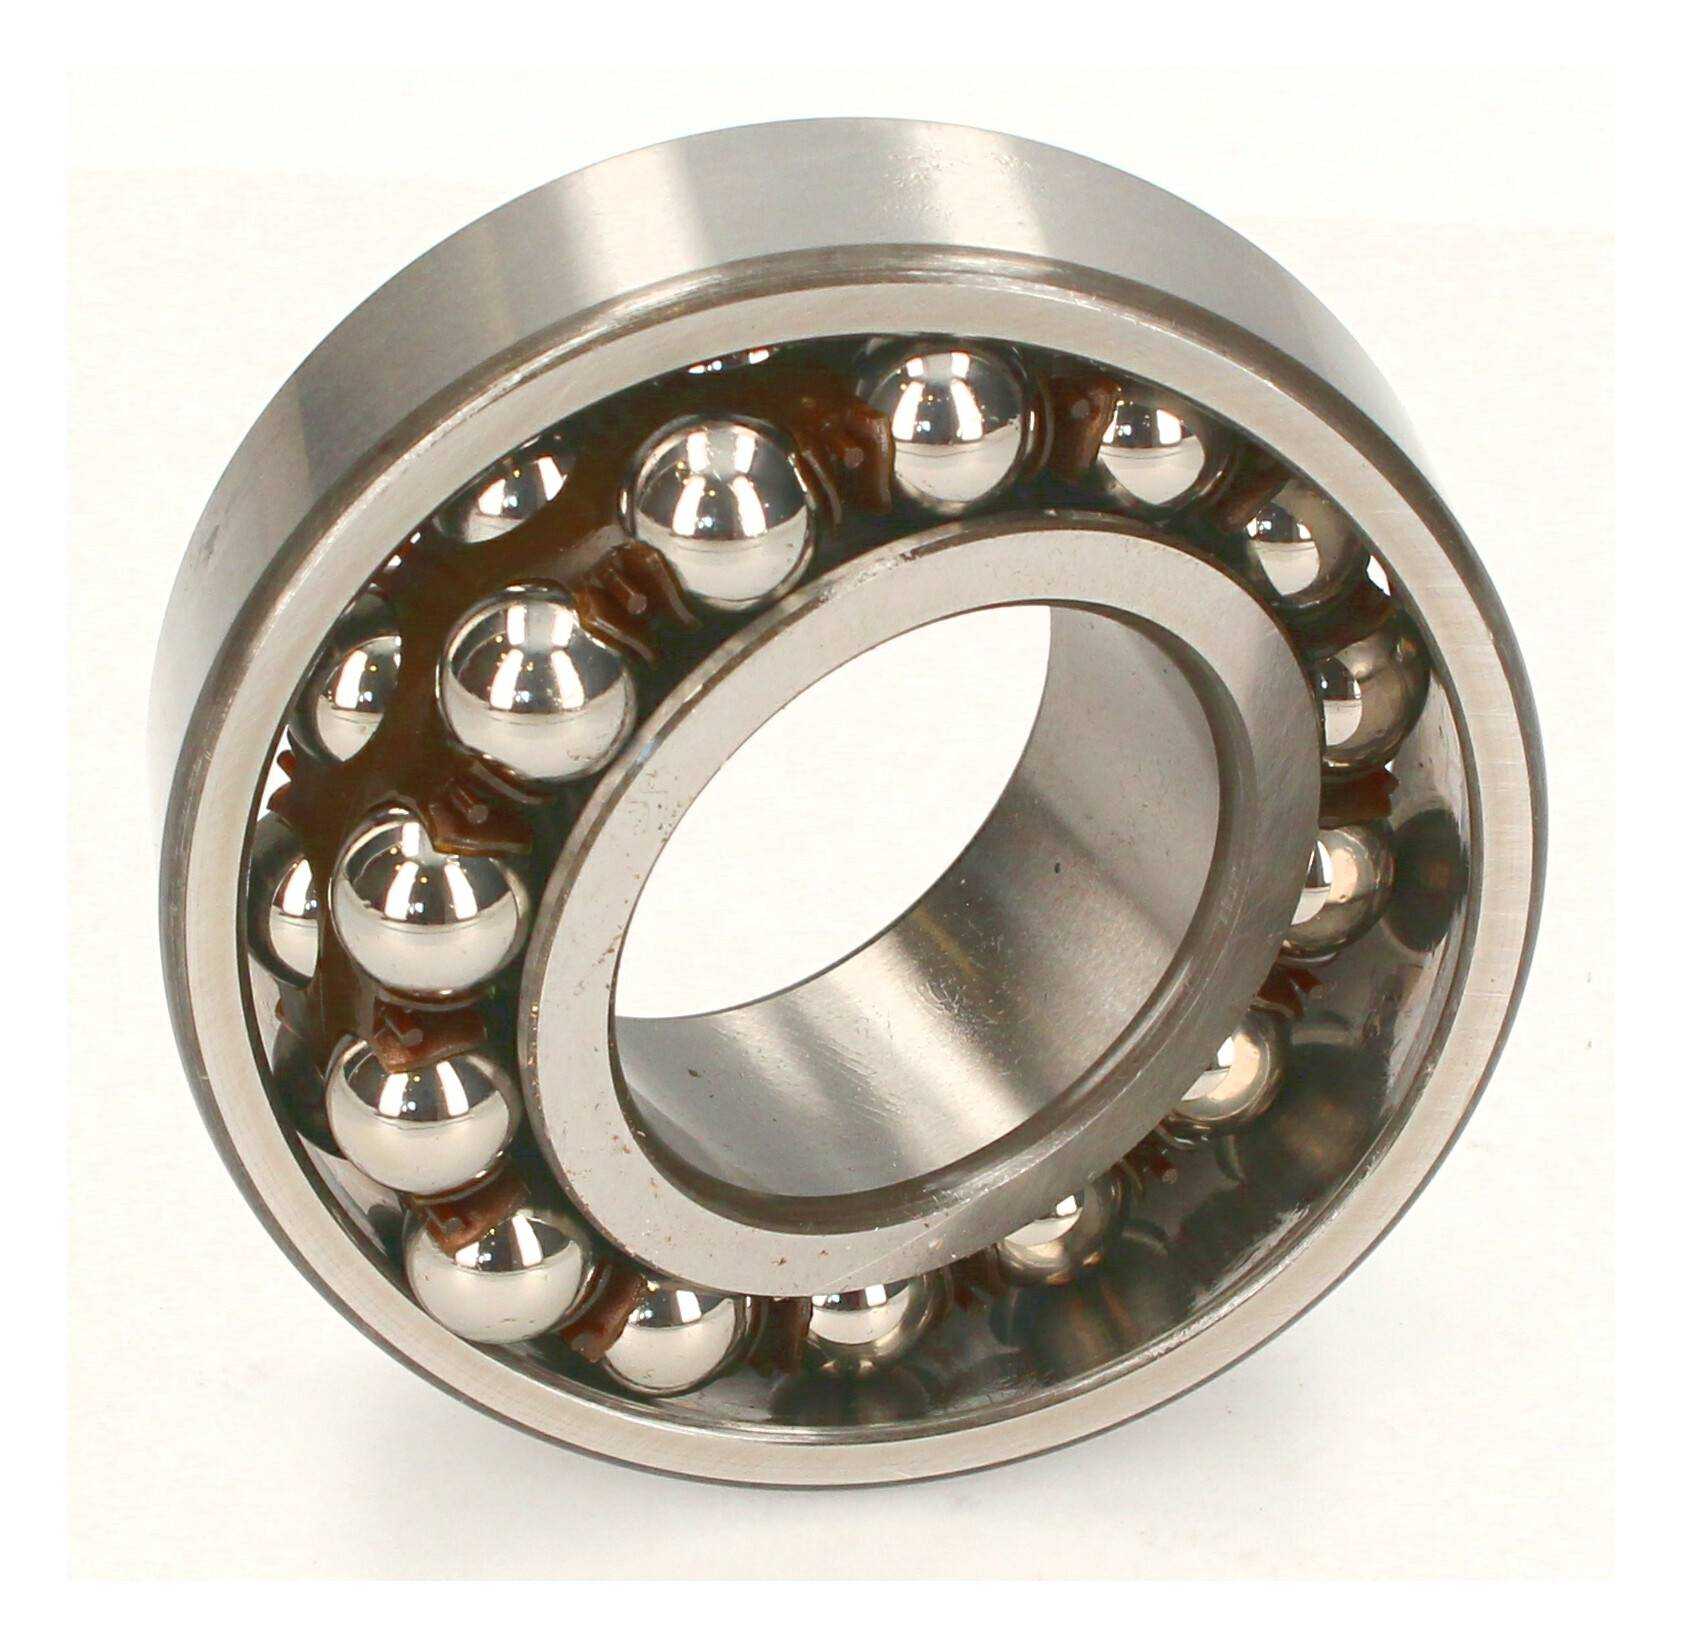 DOUBLE ROW BALL BEARING 1210-TVH-C3 FAG (WITHOUT PACKAGING) - Image 1